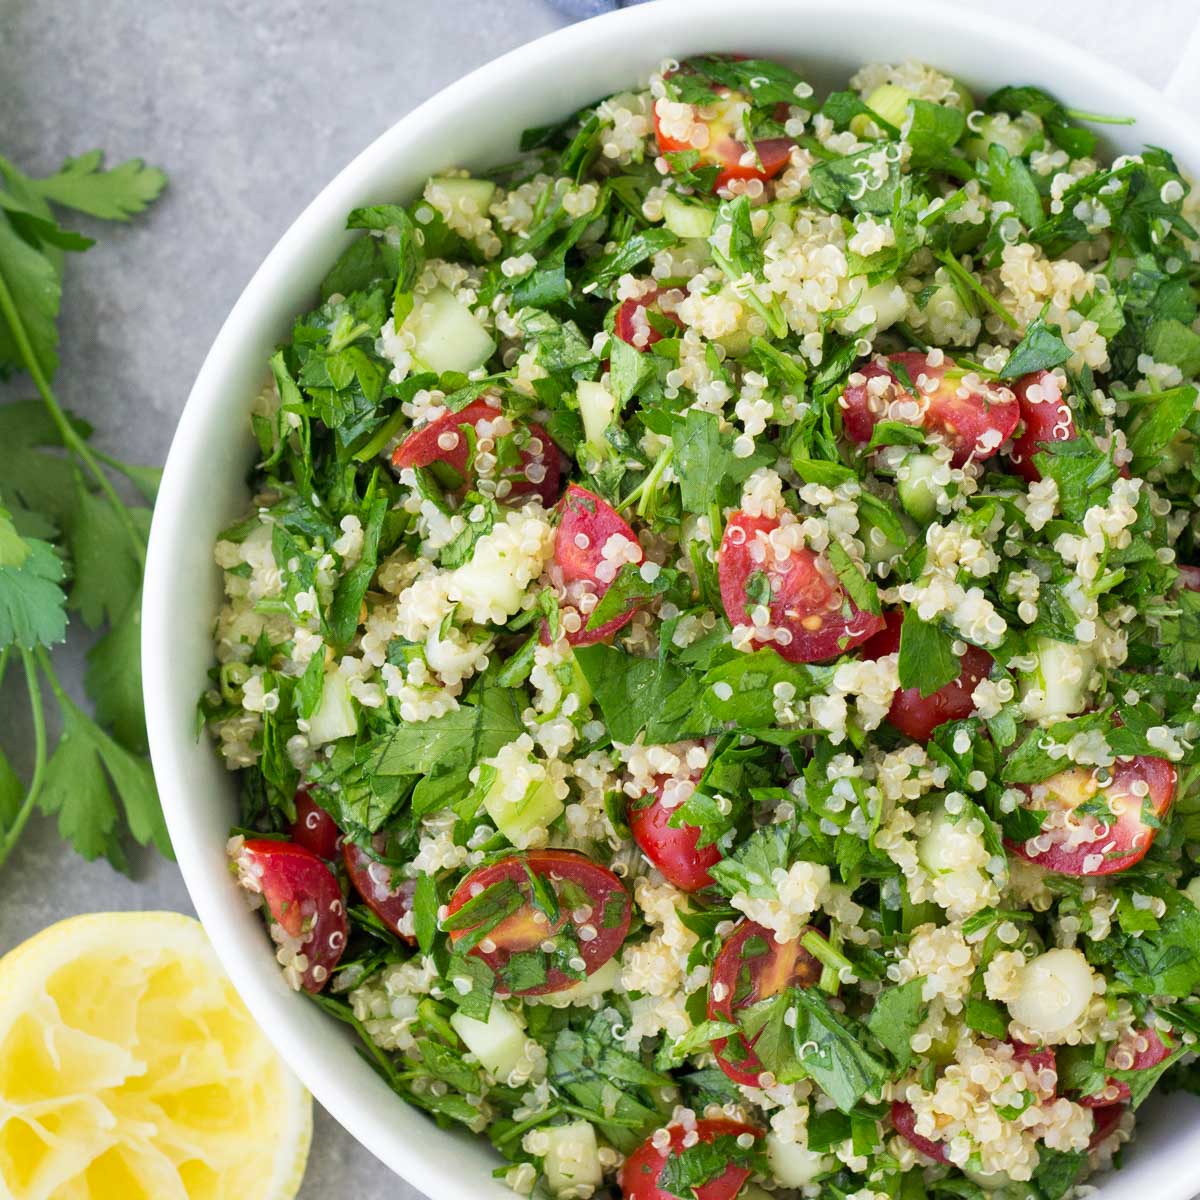 Tabouli (tabbouleh) served in a white bowl.